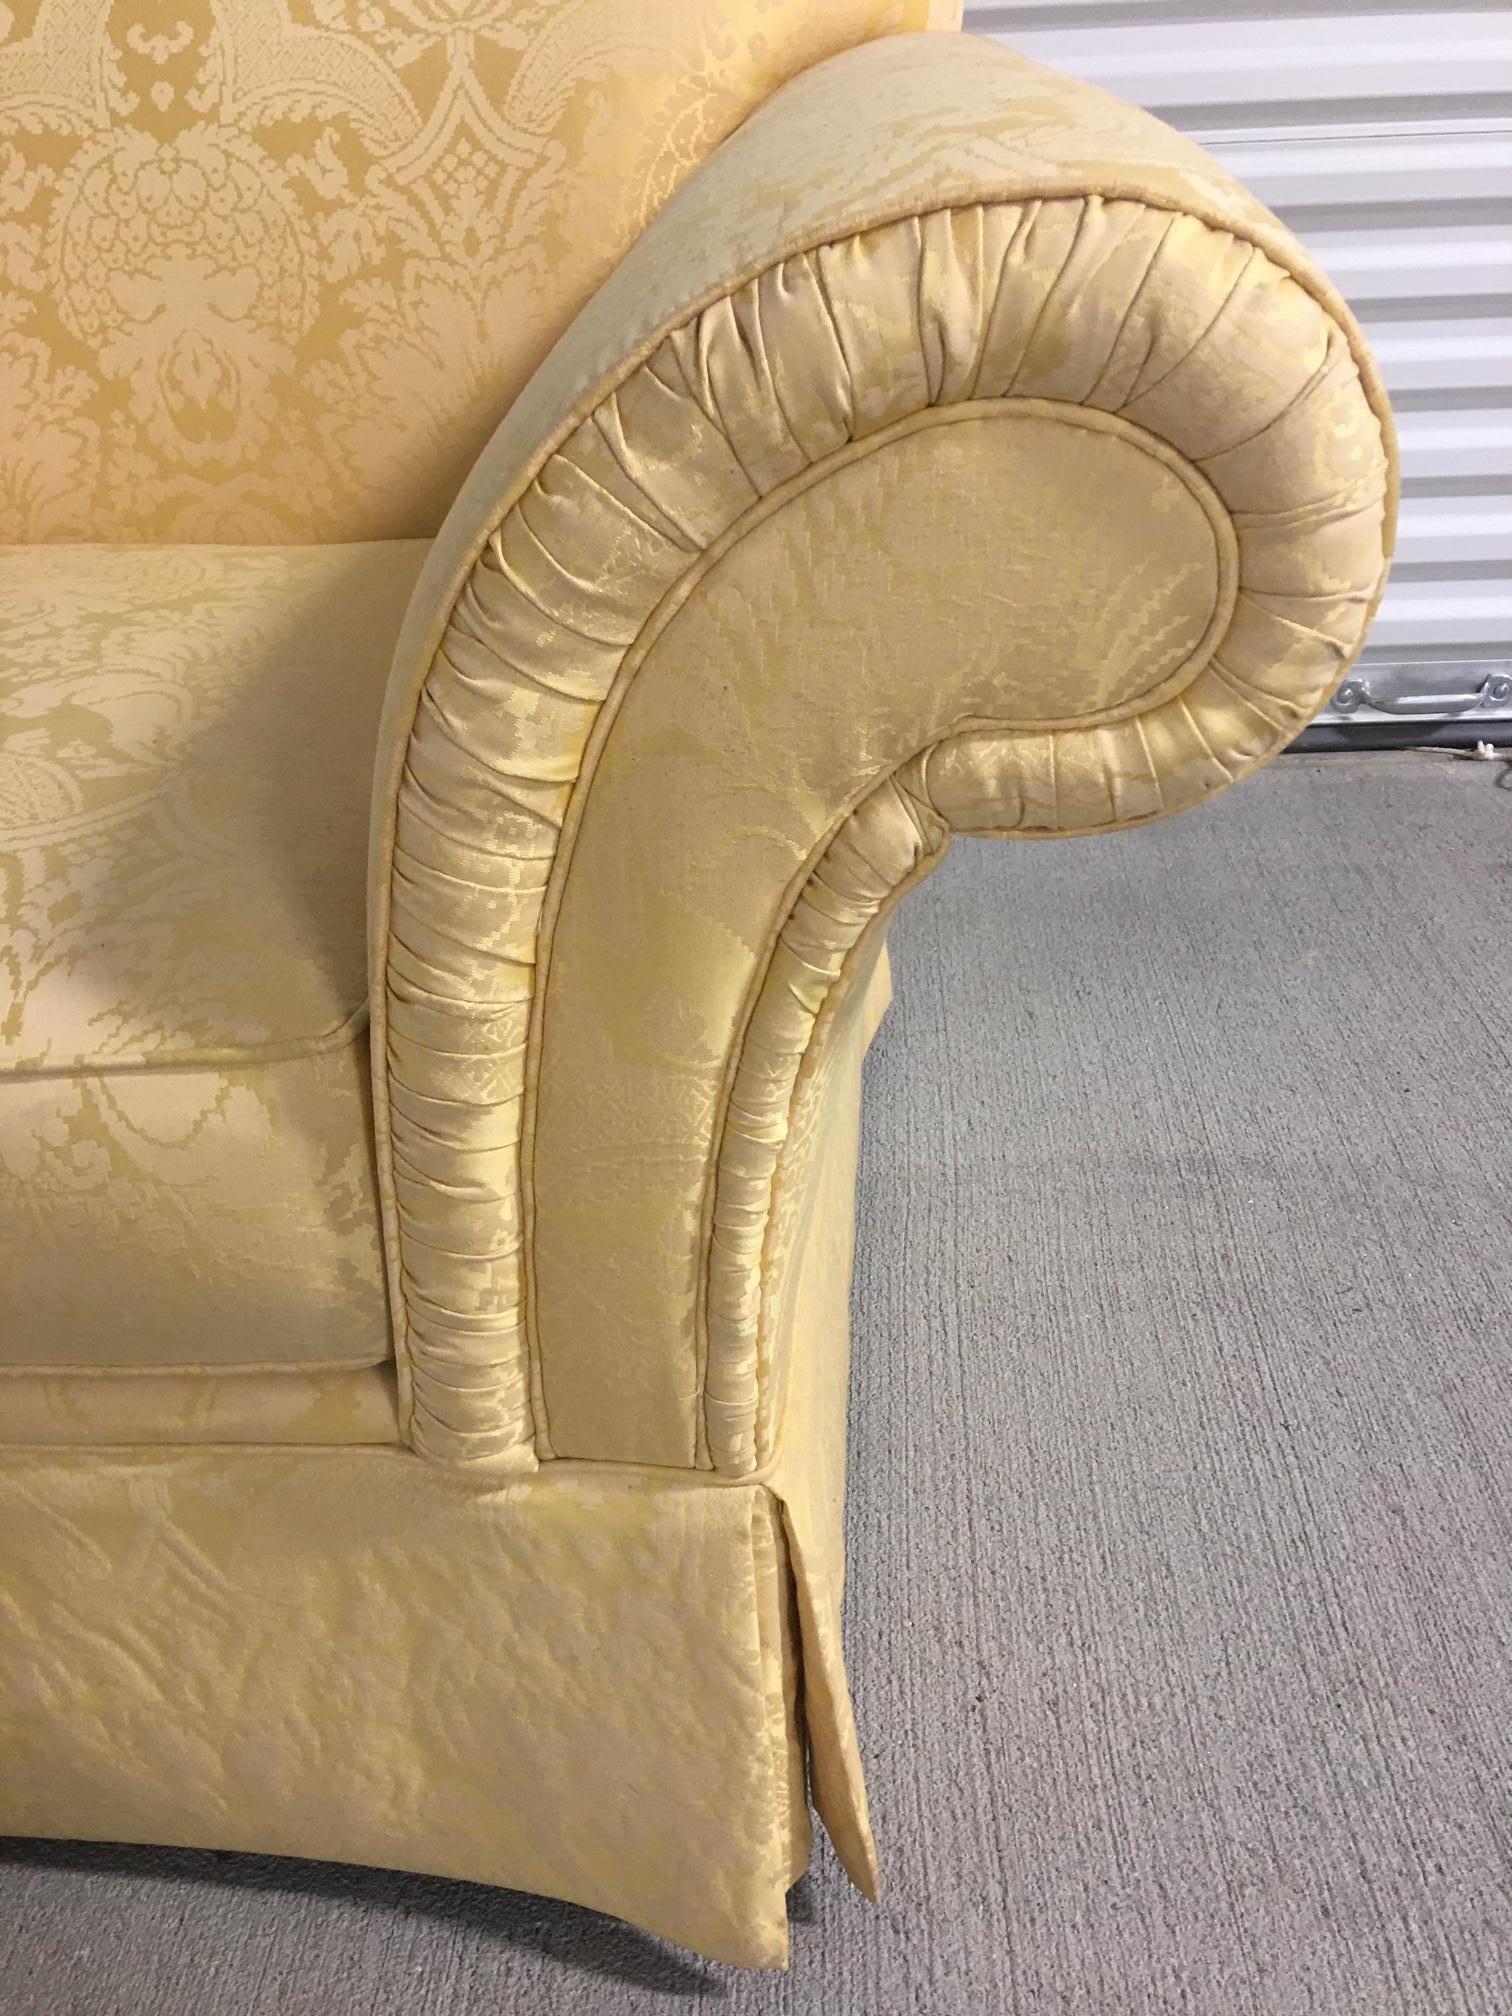 American Upholstered Loveseat in a Yellow Damask Fabric, 20th Century